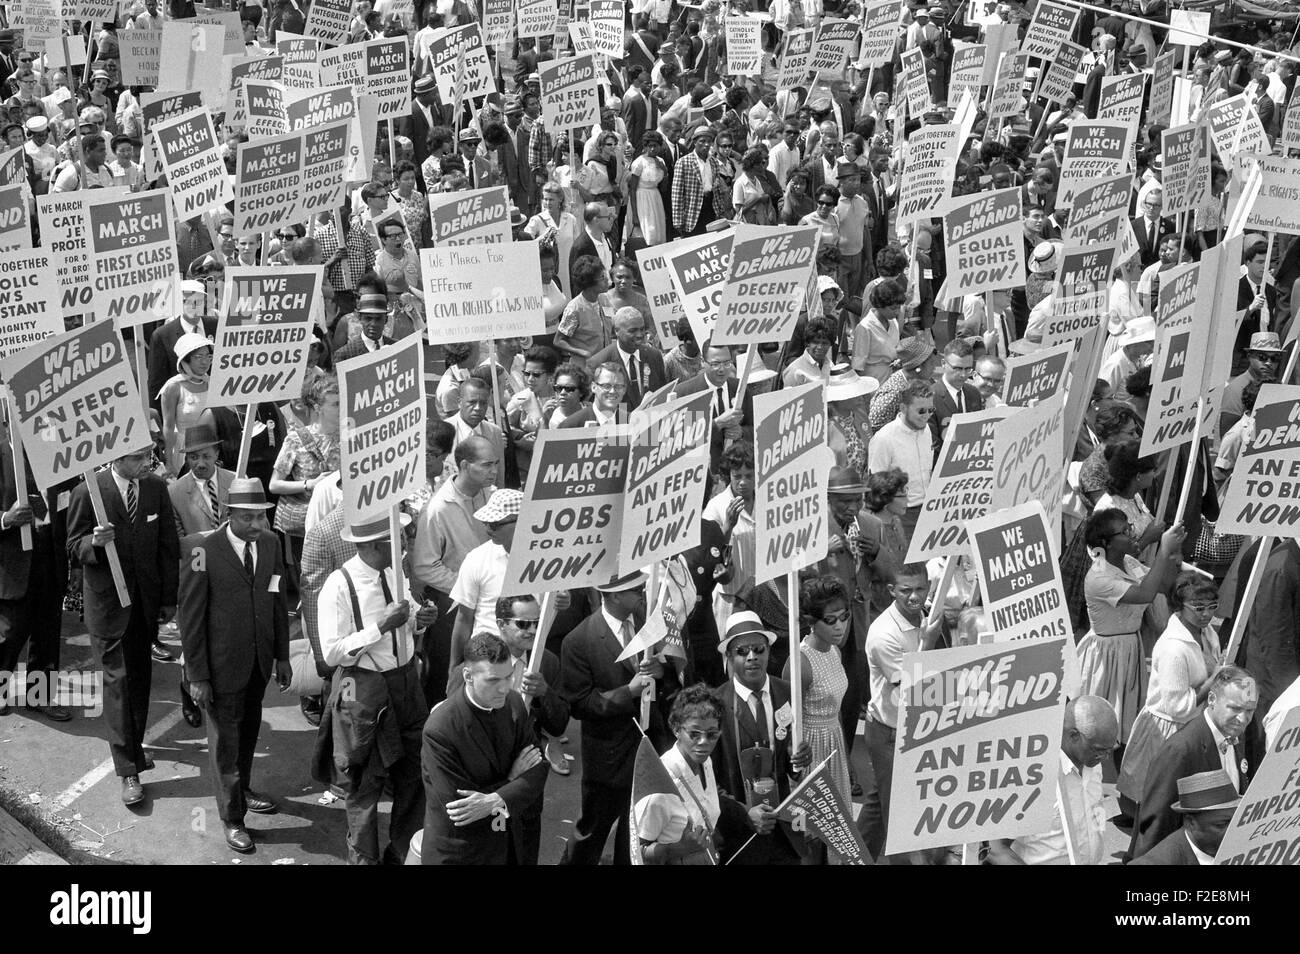 Civil rights supporters carry signs and take to the streets during the March on Washington for Jobs and Freedom August 28, 1963 in Washington, DC. Approximately 250,00 people marched organized by civil rights, labor and religious organizations. Stock Photo